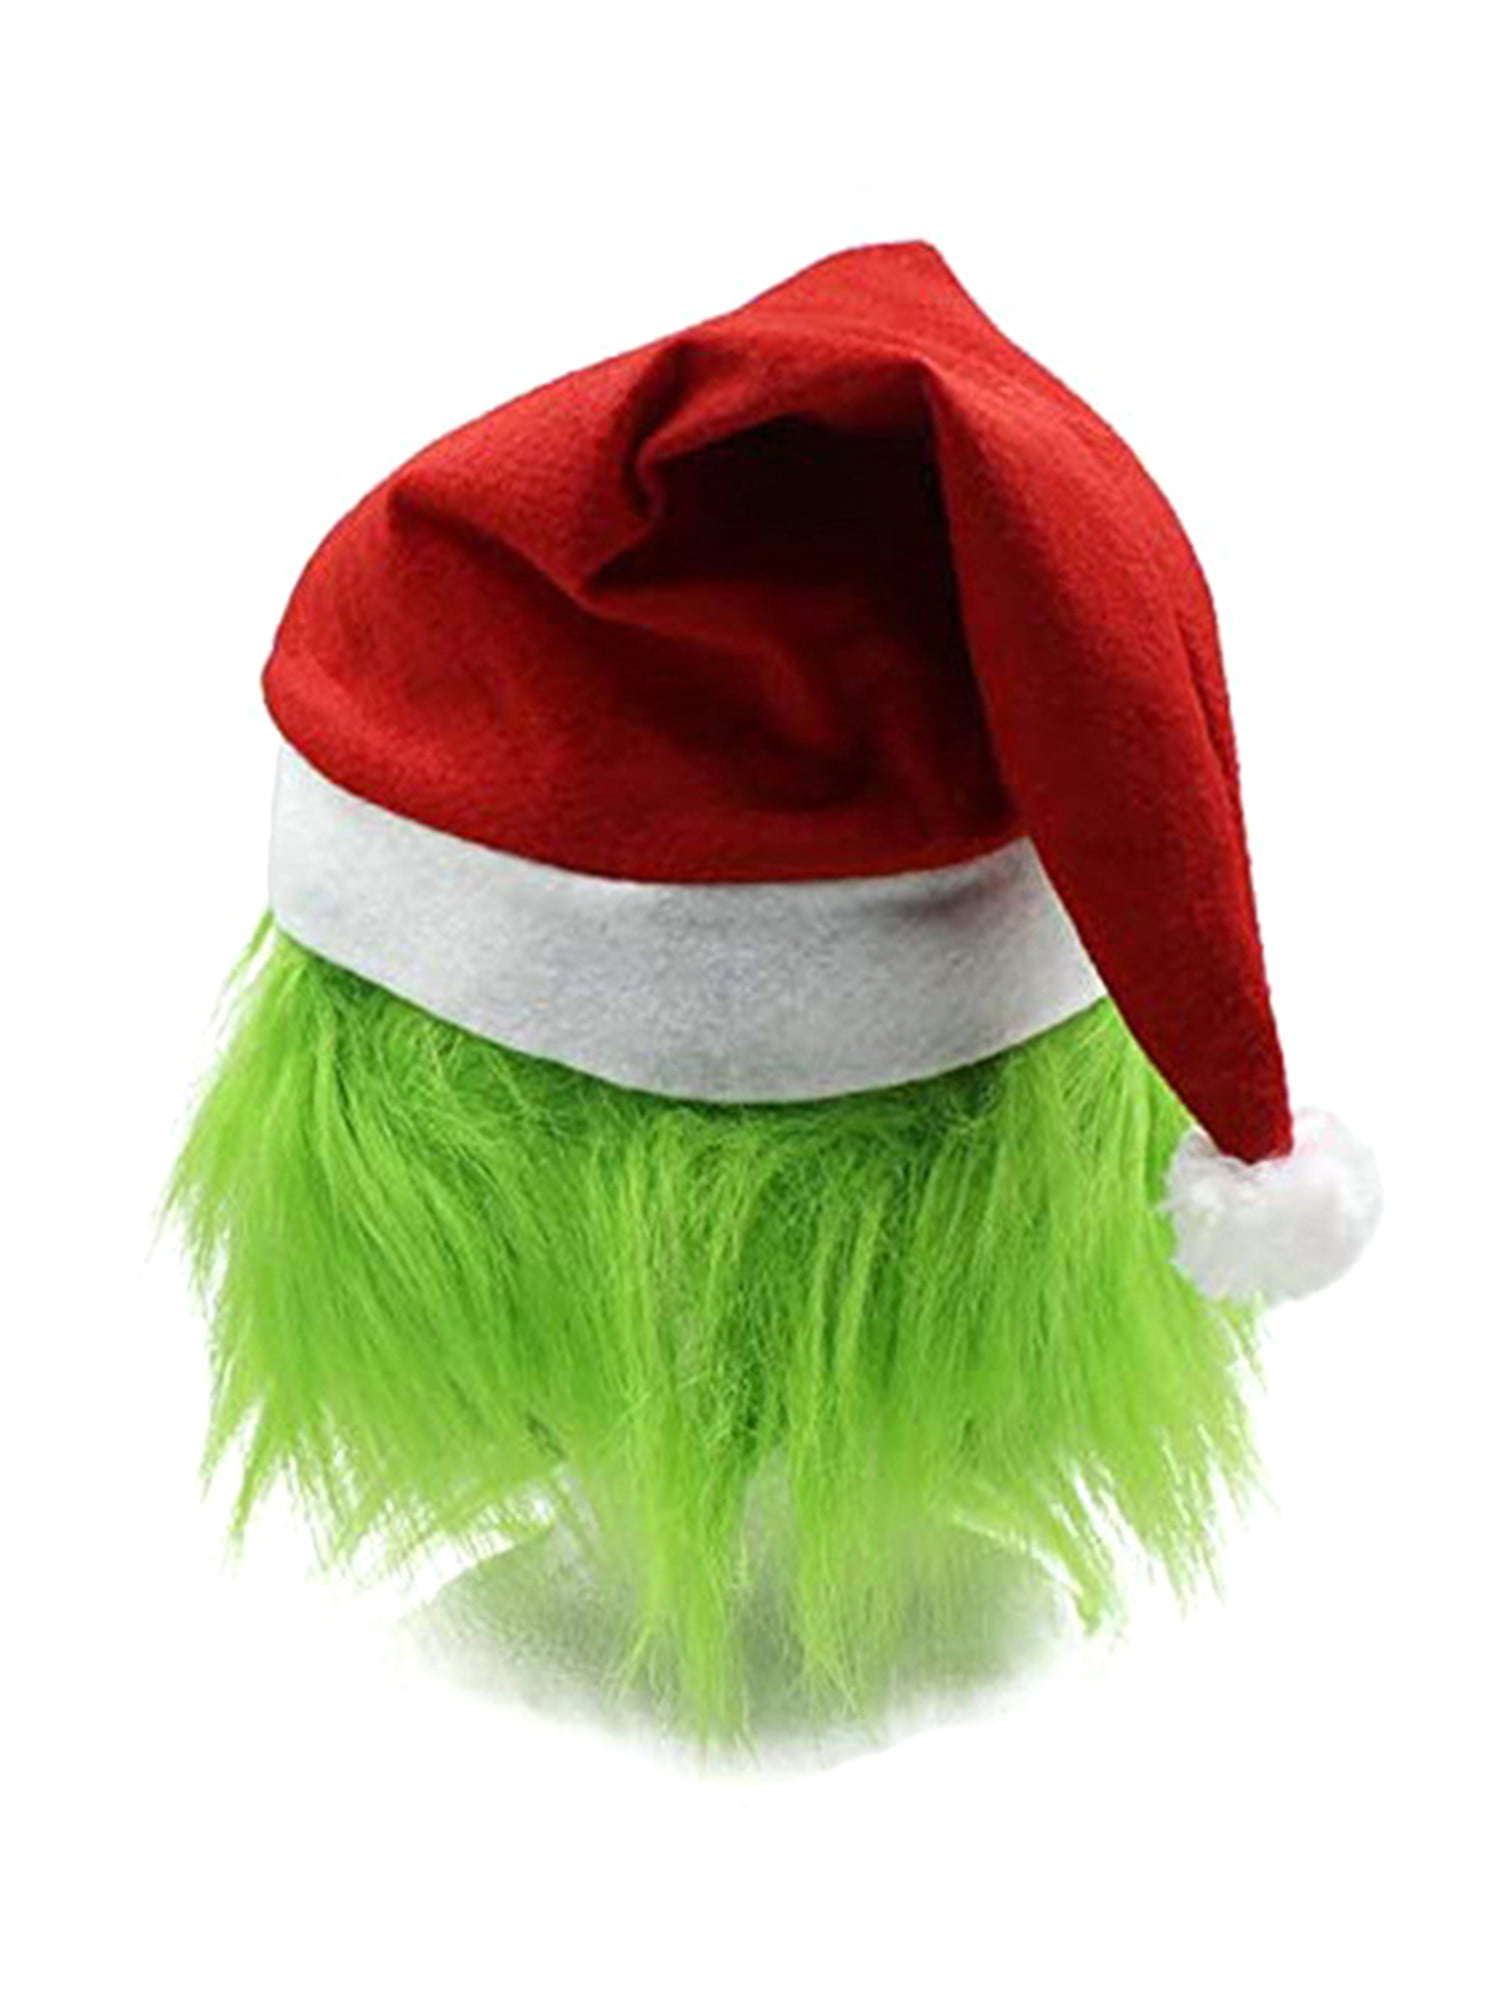 PAFIGA Grinch Costume for Men 7pcs Christmas Deluxe Furry Adult Santa Suit Green Outfit 